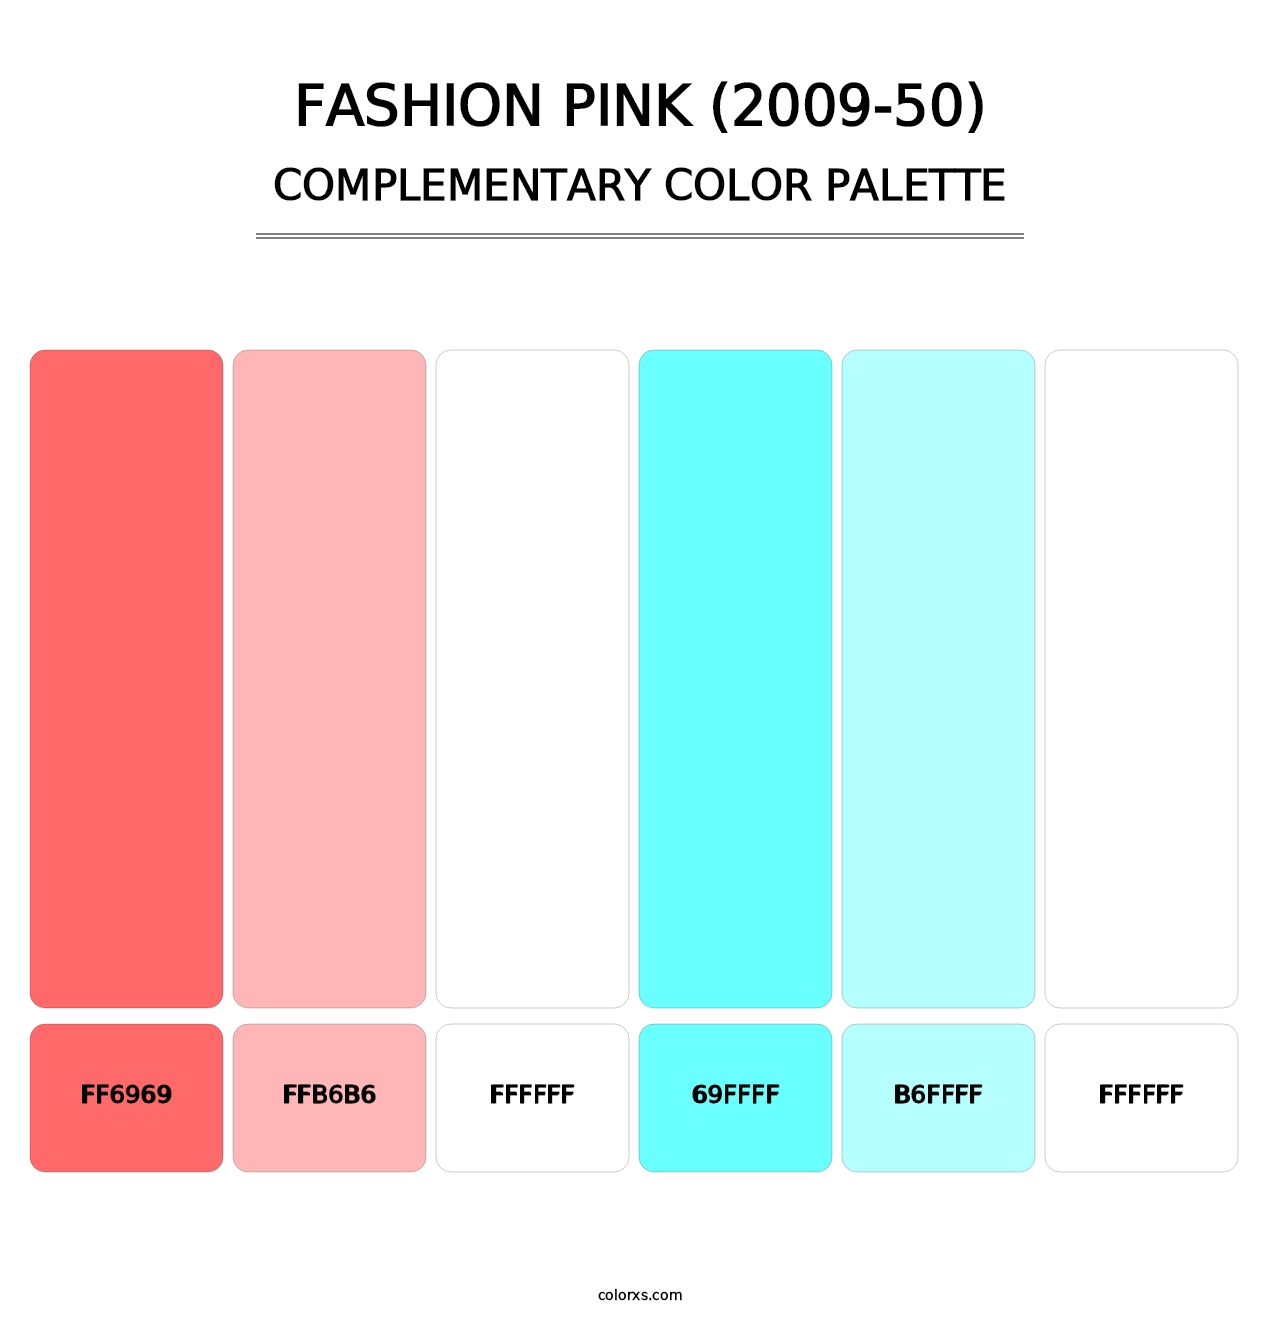 Fashion Pink (2009-50) - Complementary Color Palette